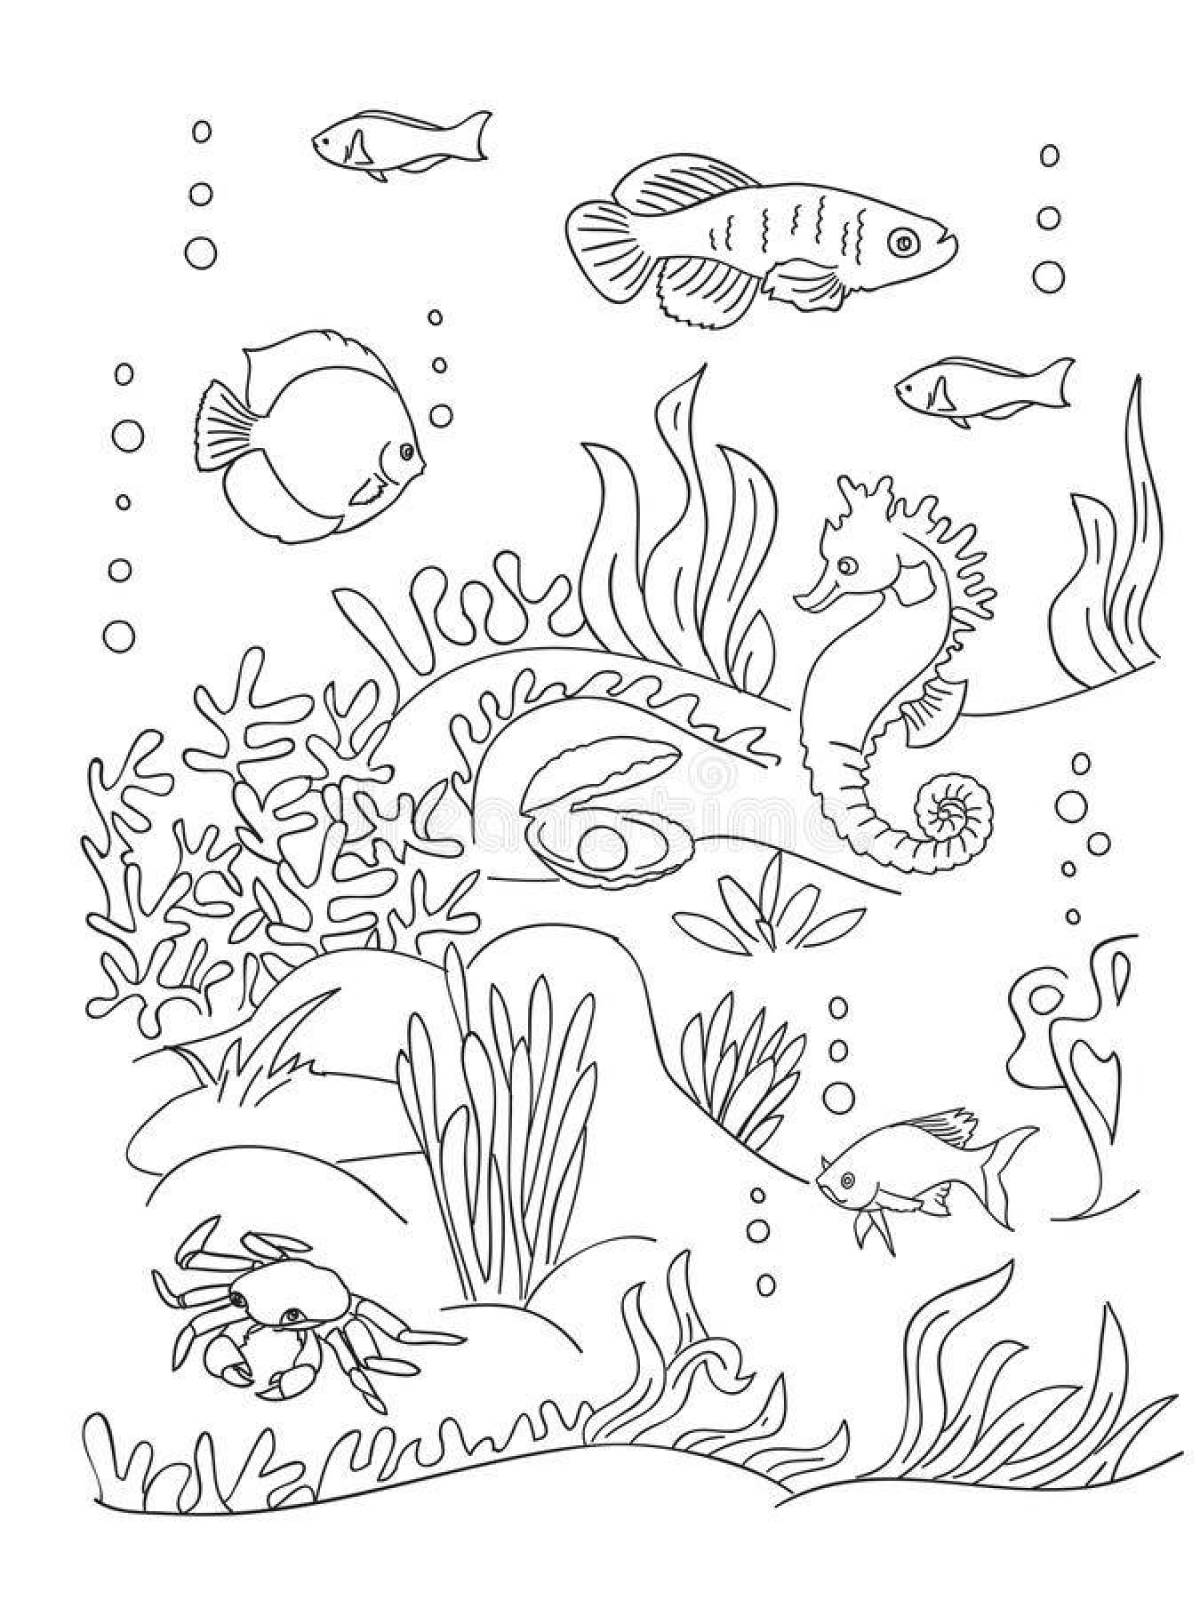 Jaycee case playful coloring page